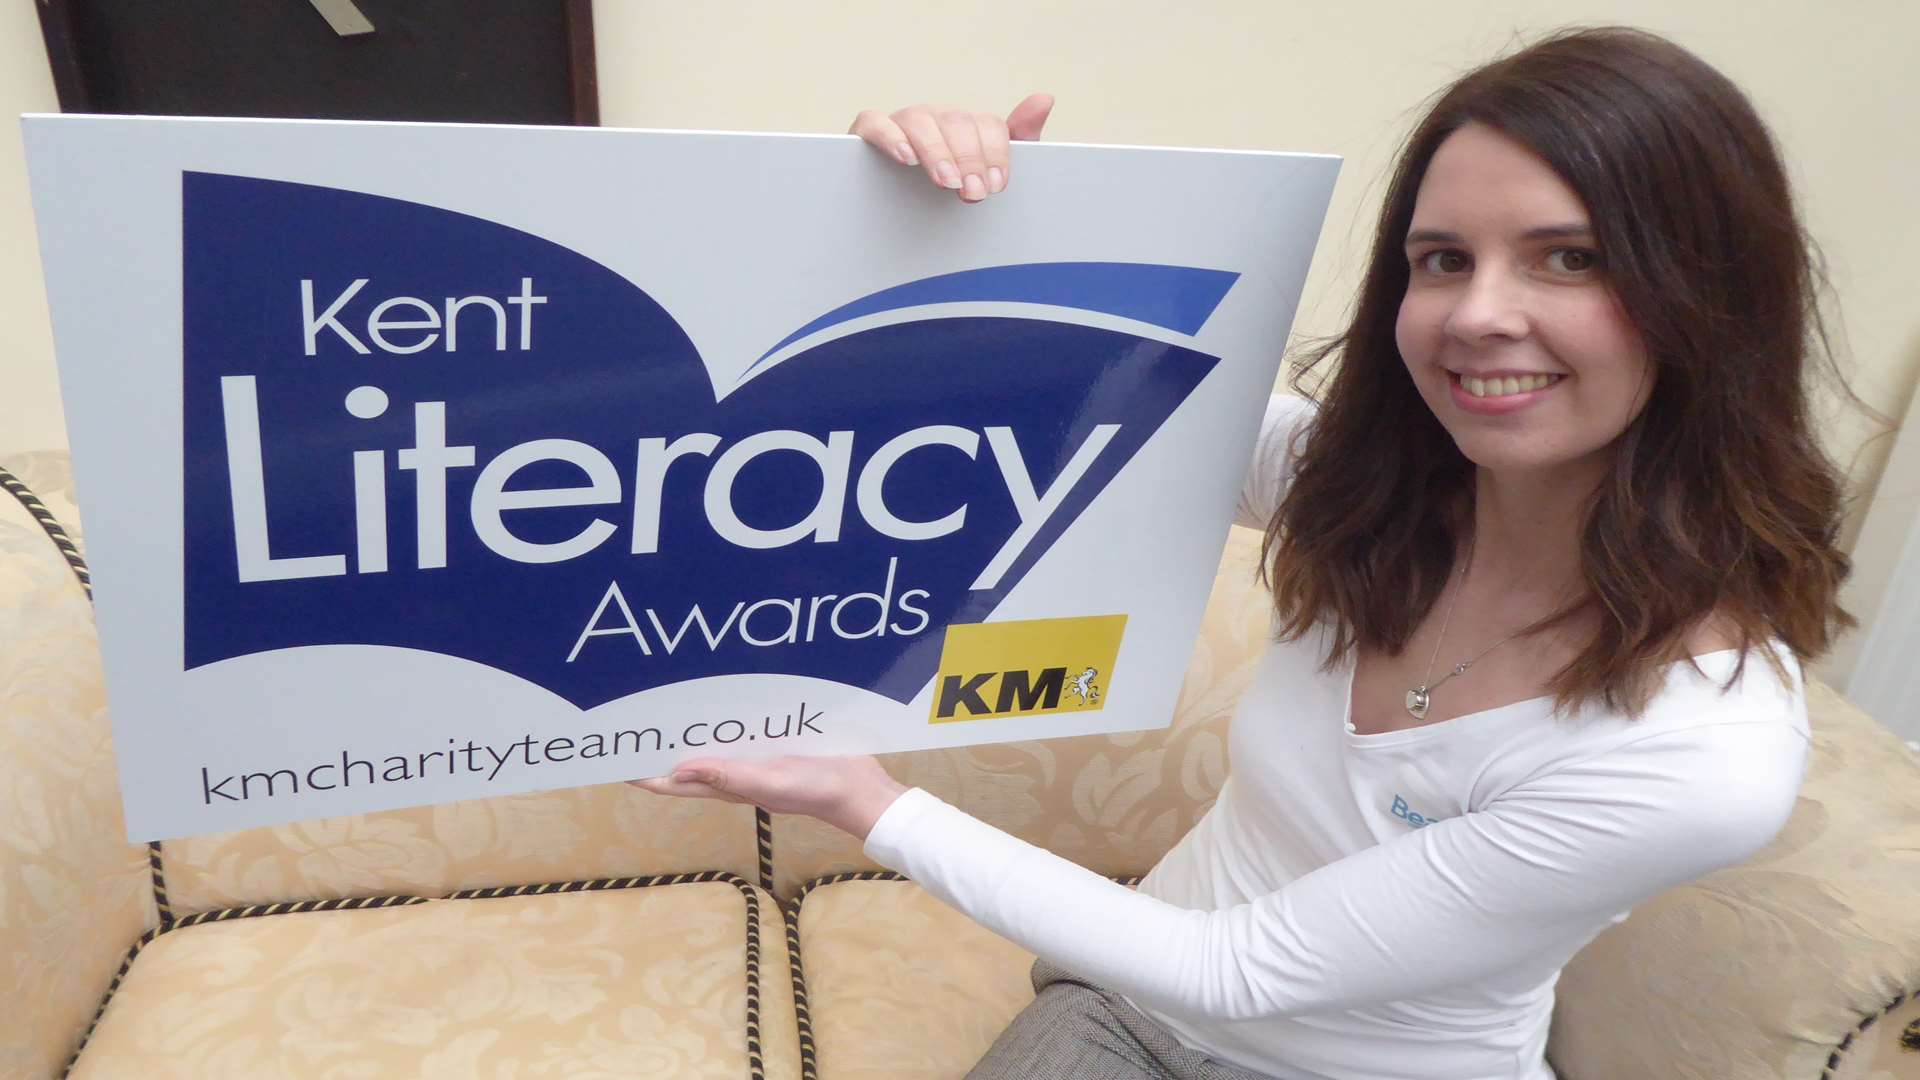 Kate Rumsby of Beanstalk which is supporting the Kent Literacy Awards 2017.